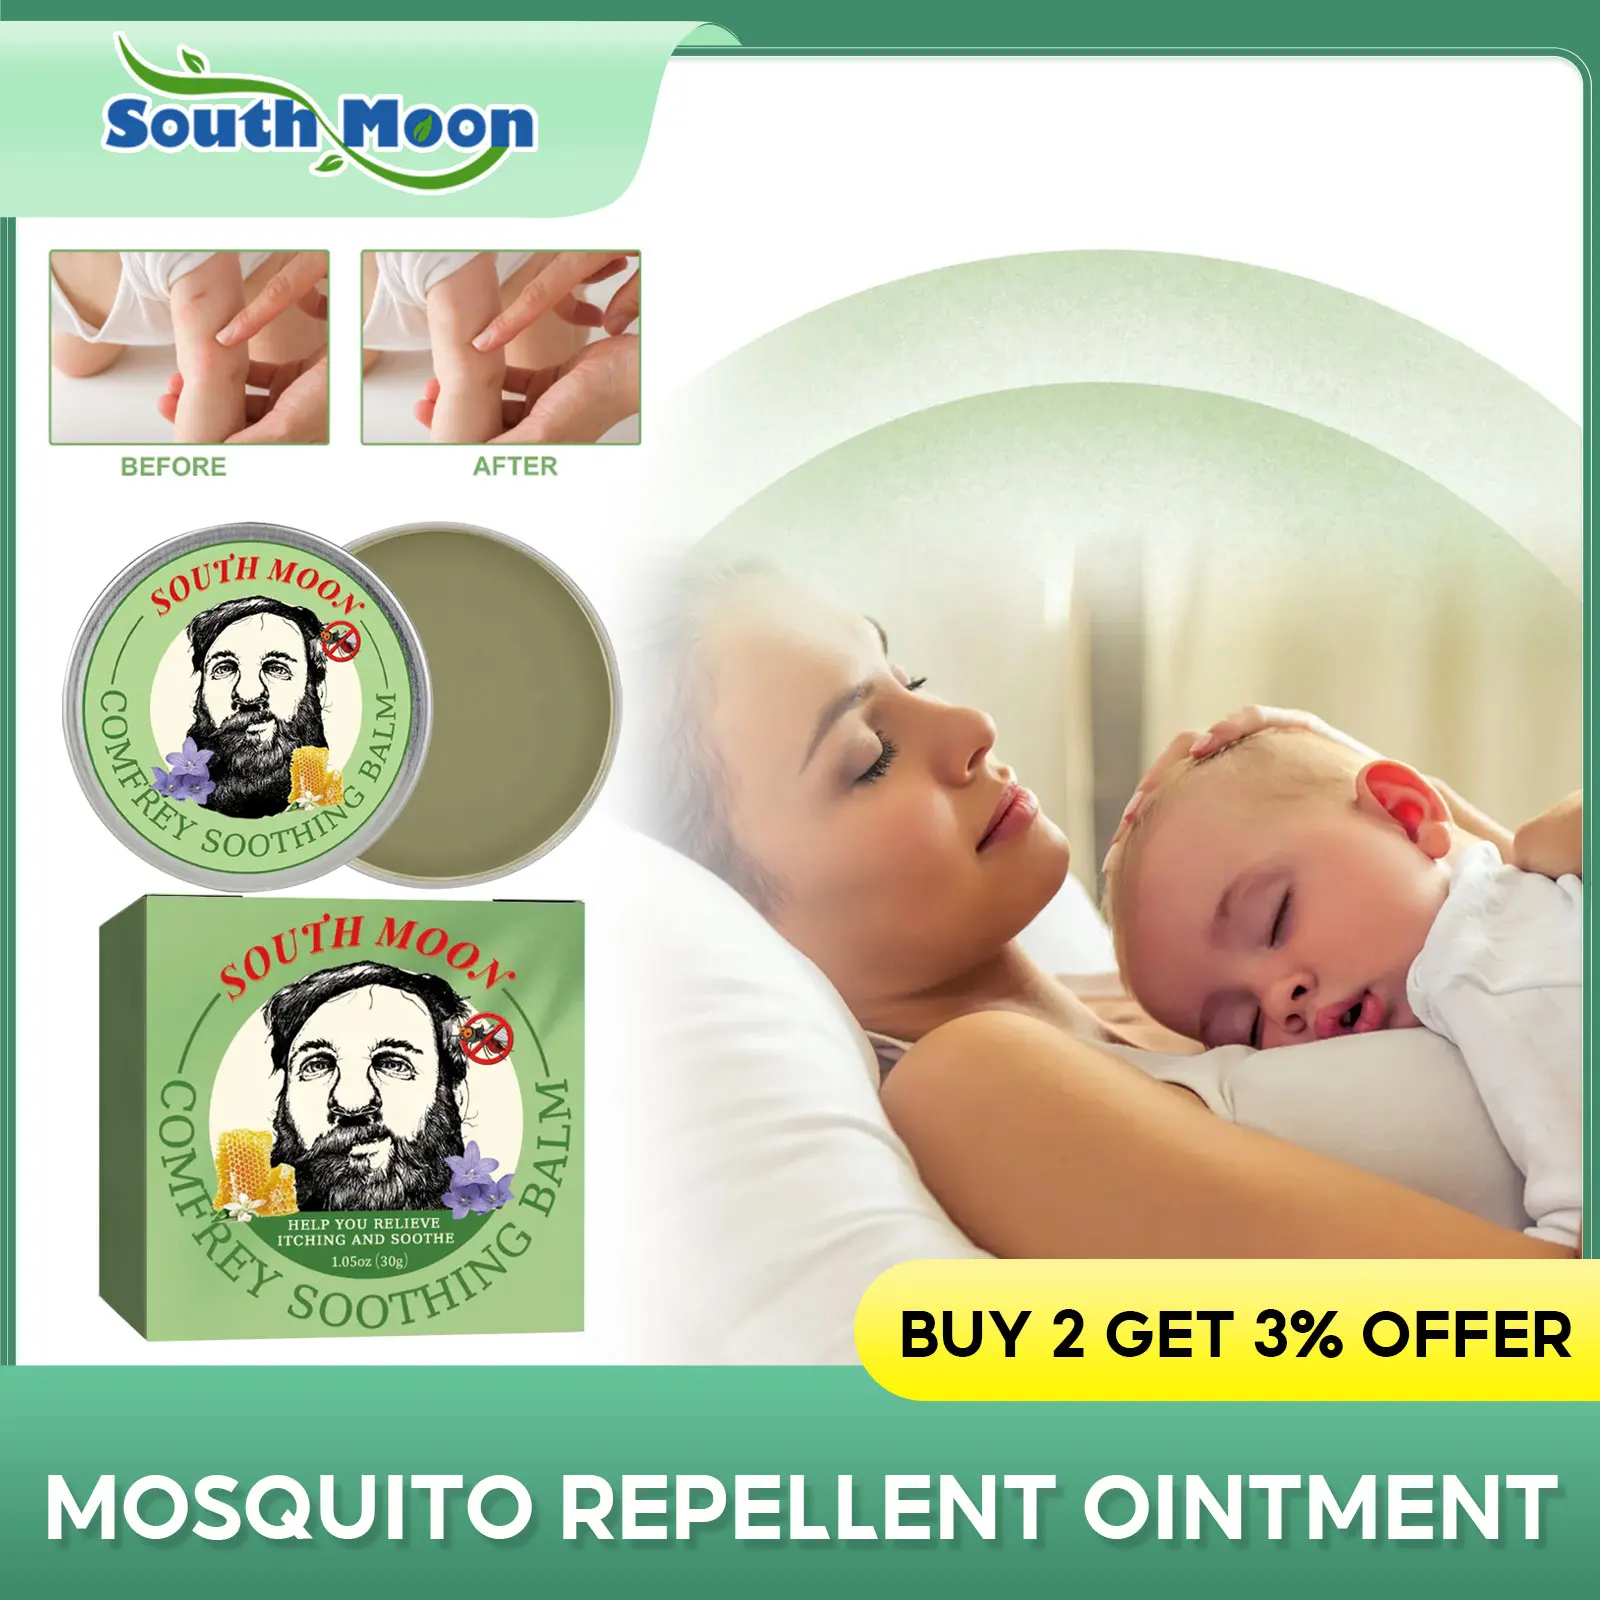 

Anti Mosquito Cream Mosquito Repellent Prevent Insect Bites Relief Itching Swelling Headache Dizziness Soothing Body Pest Killer